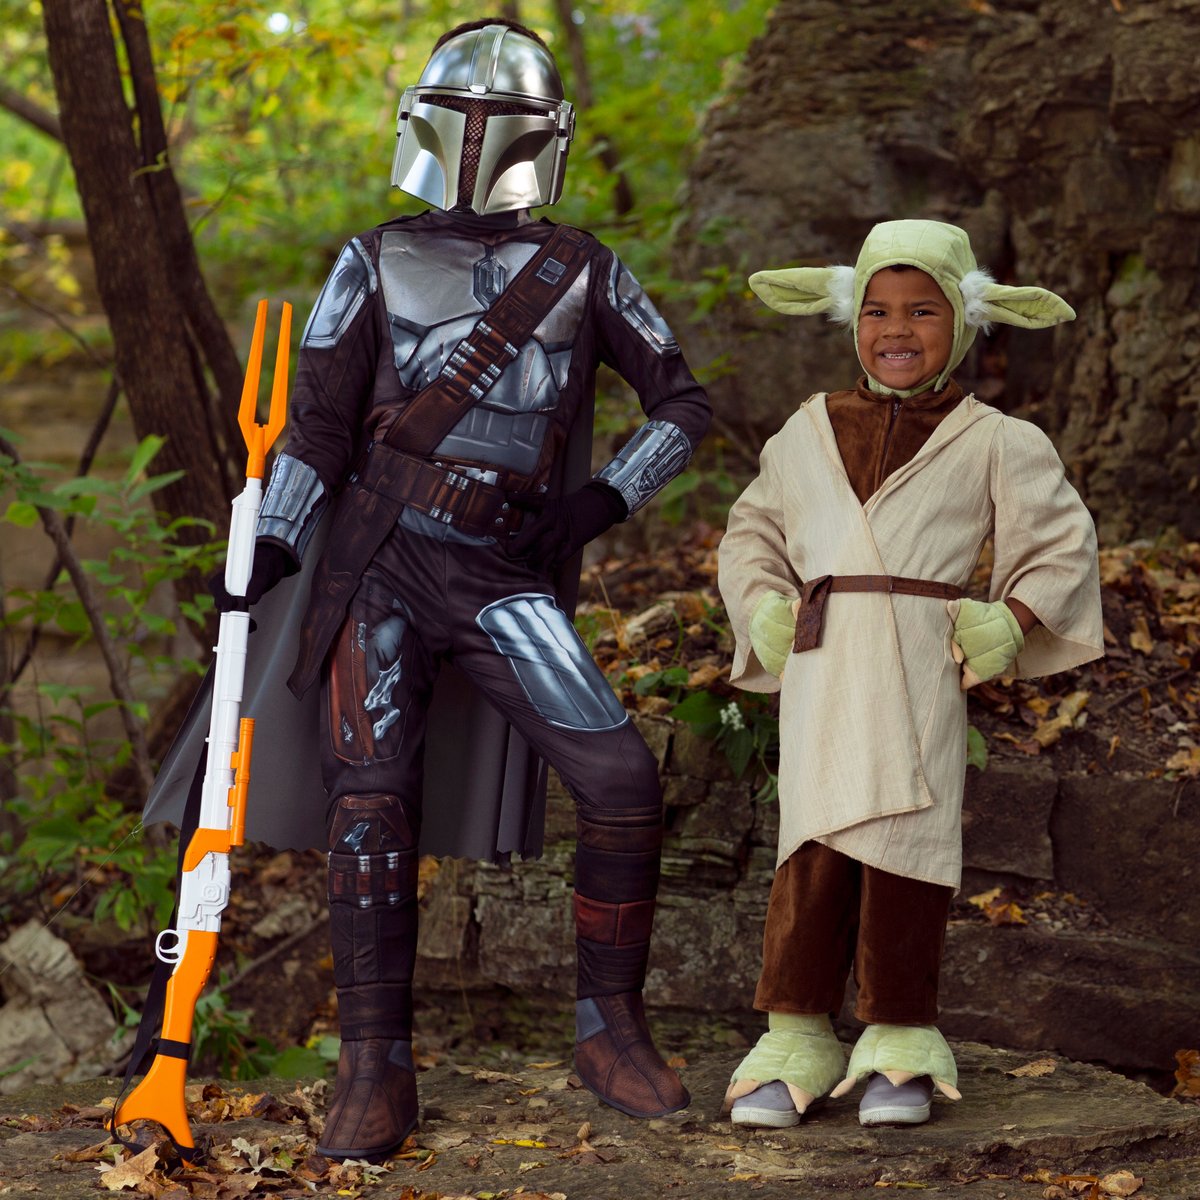 May the Fourth is coming! How're you celebrating the galaxy far, far away? Whether marathoning the movies on Saturday, adventuring through a Star Wars playtime, or planning a convention look, our costume collection can help and keep the party going! 🔽 bit.ly/2mNudrE